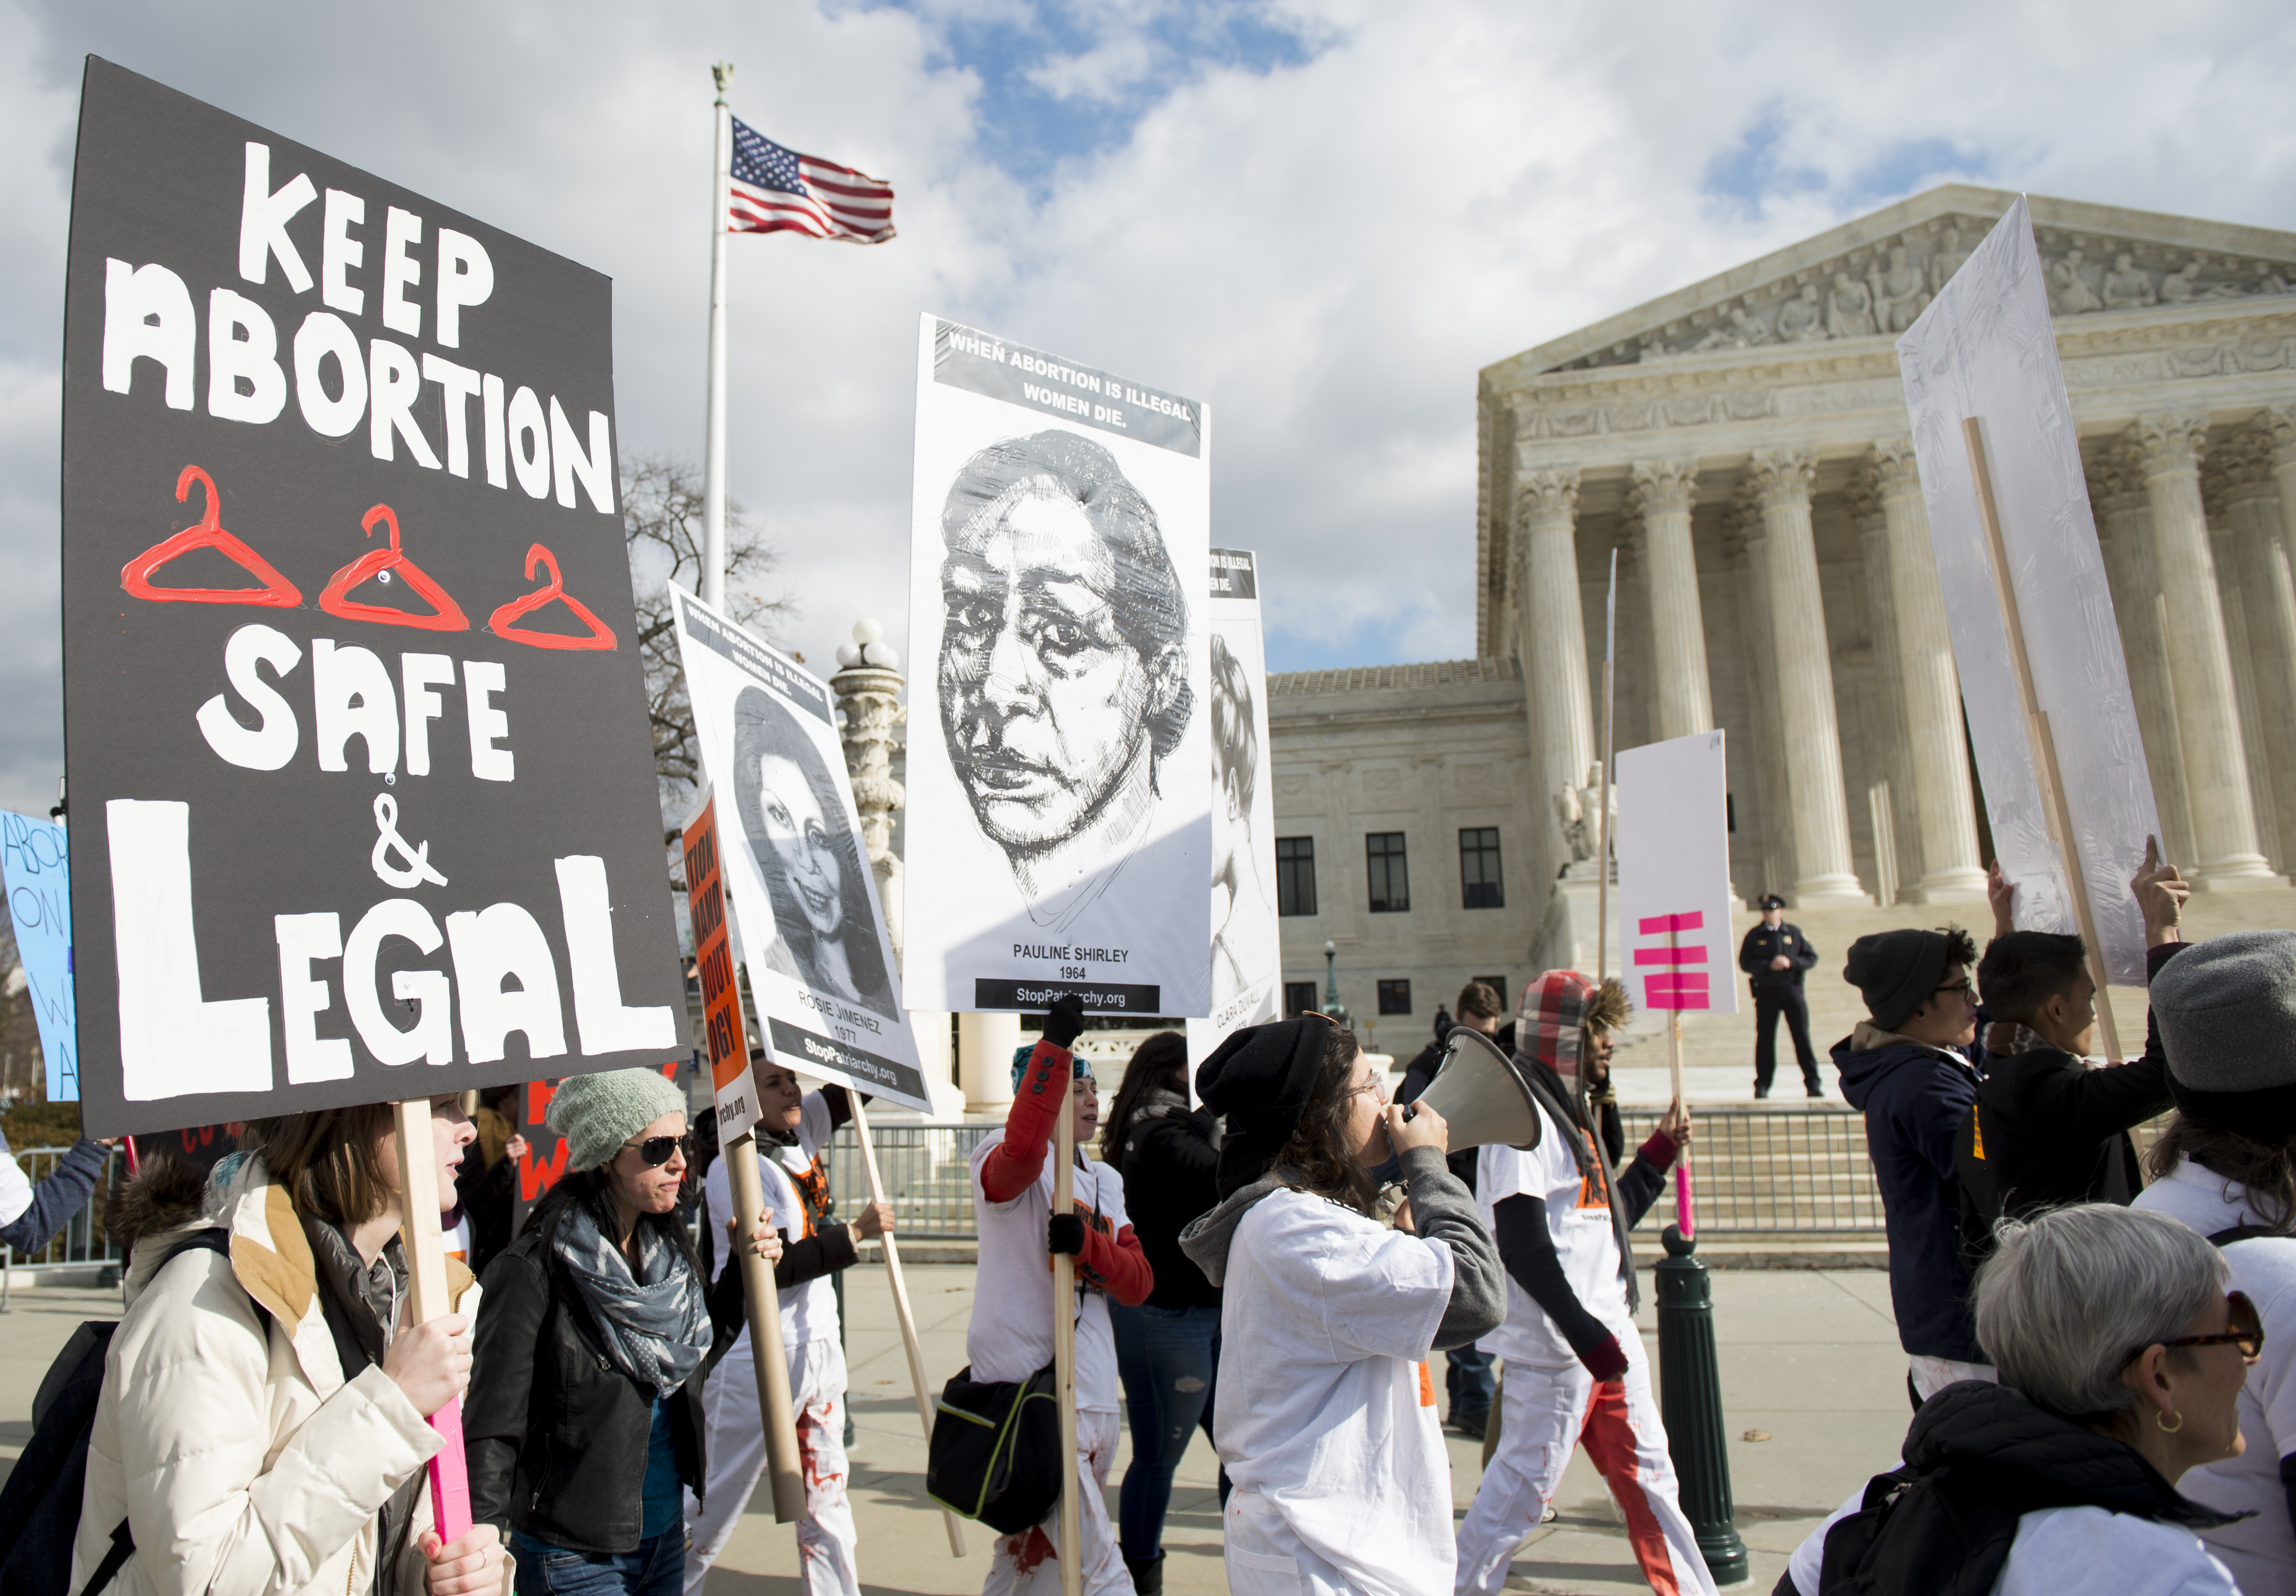 Pro-choice protesters chant in front of the Supreme Court on Thursday, Jan. 22, 2015, the anniversary of the Roe v Wade abortion decision. (Bill Clark--CQ Roll Call)